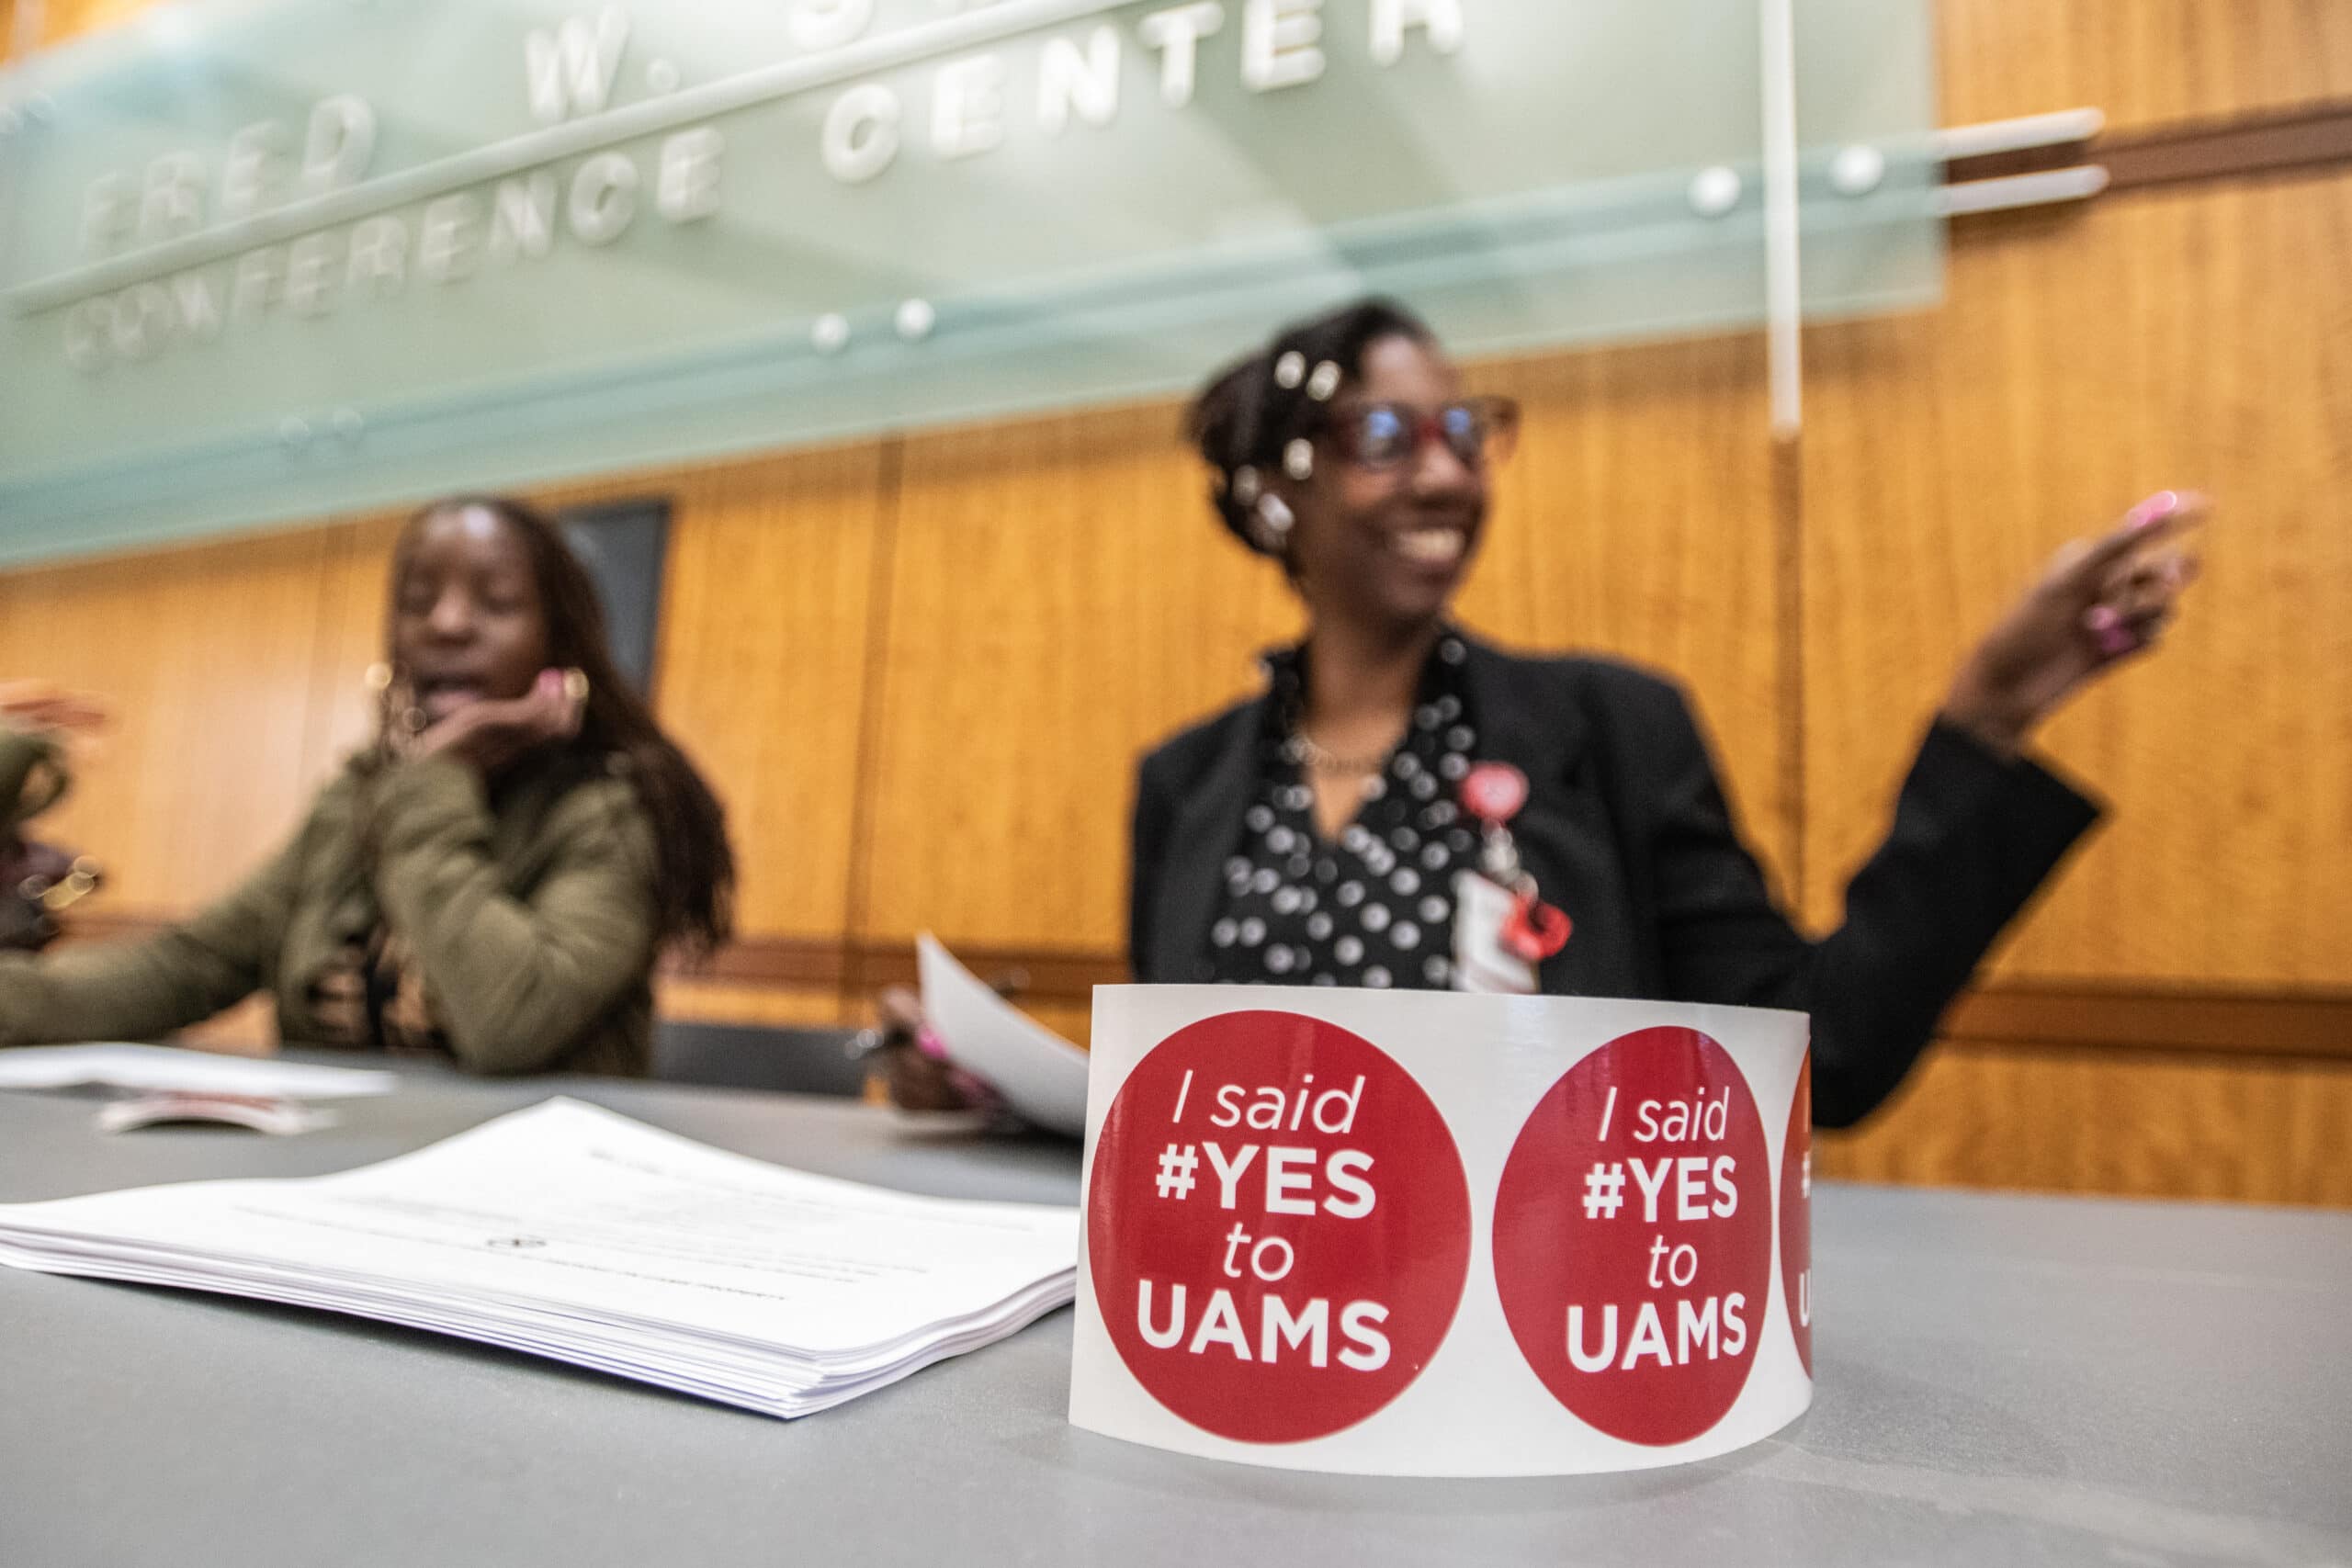 UAMS is hiring! Come check out our open positions at the June 8 Job Expo at the UAMS Northwest Regional Campus in Fayetteville. I Said #Yes to UAMS